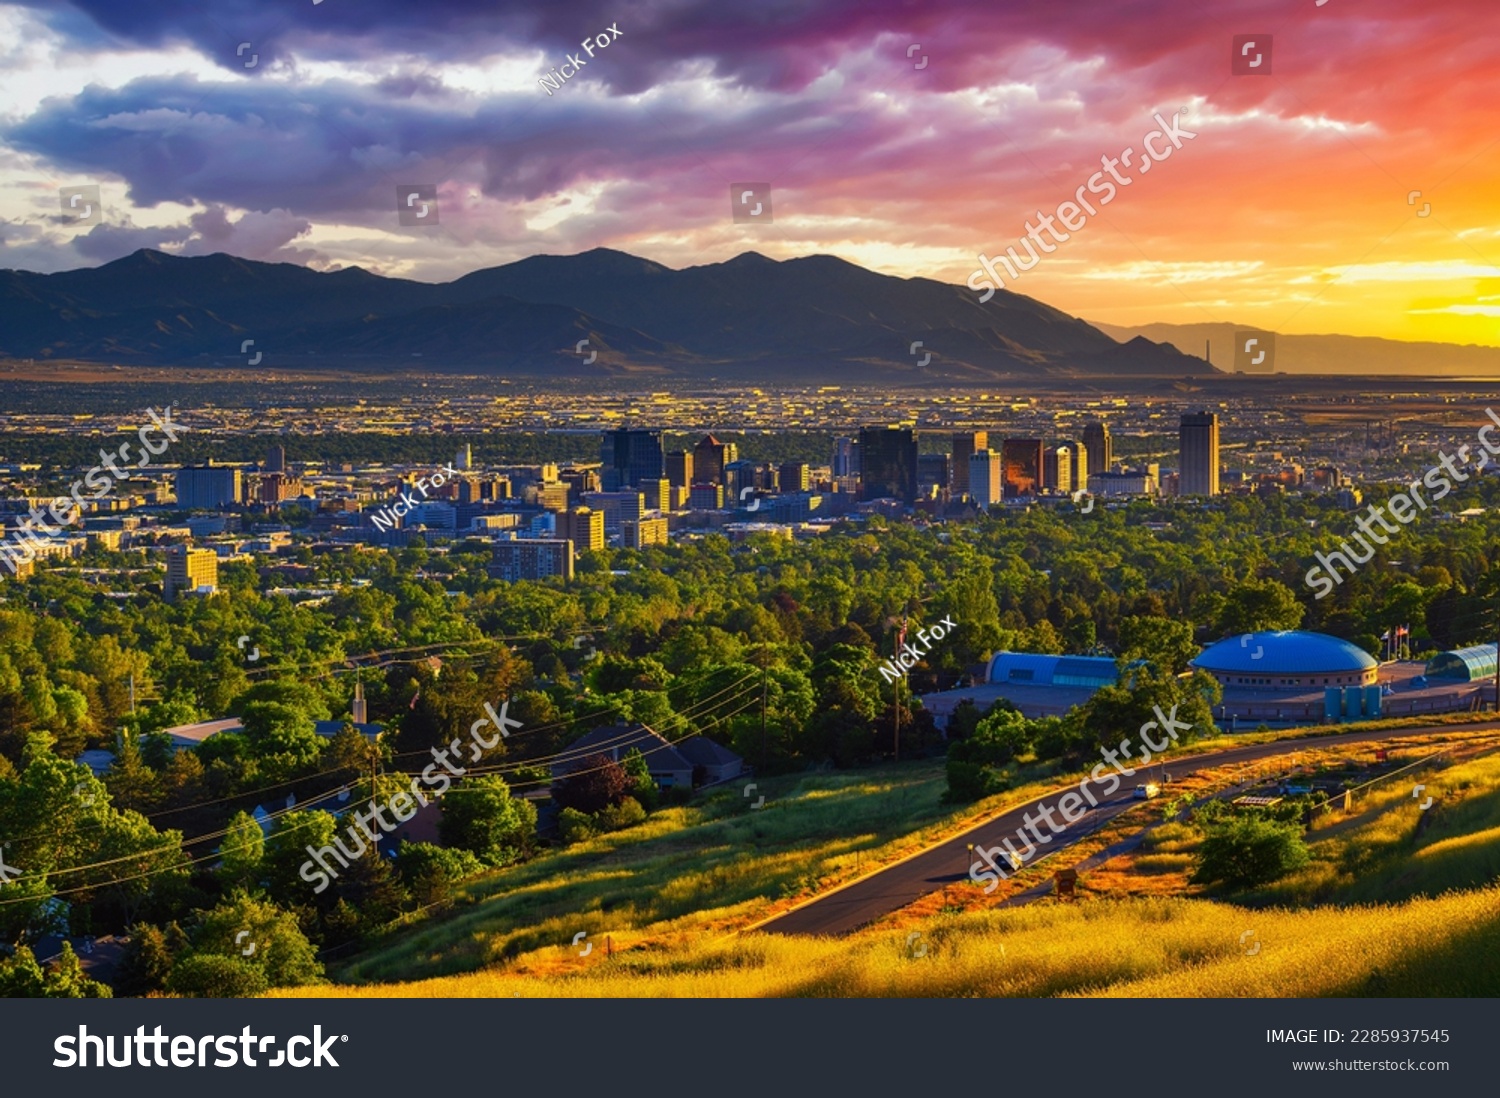 Salt Lake City skyline at sunset with Wasatch Mountains in the background, Utah, USA. #2285937545